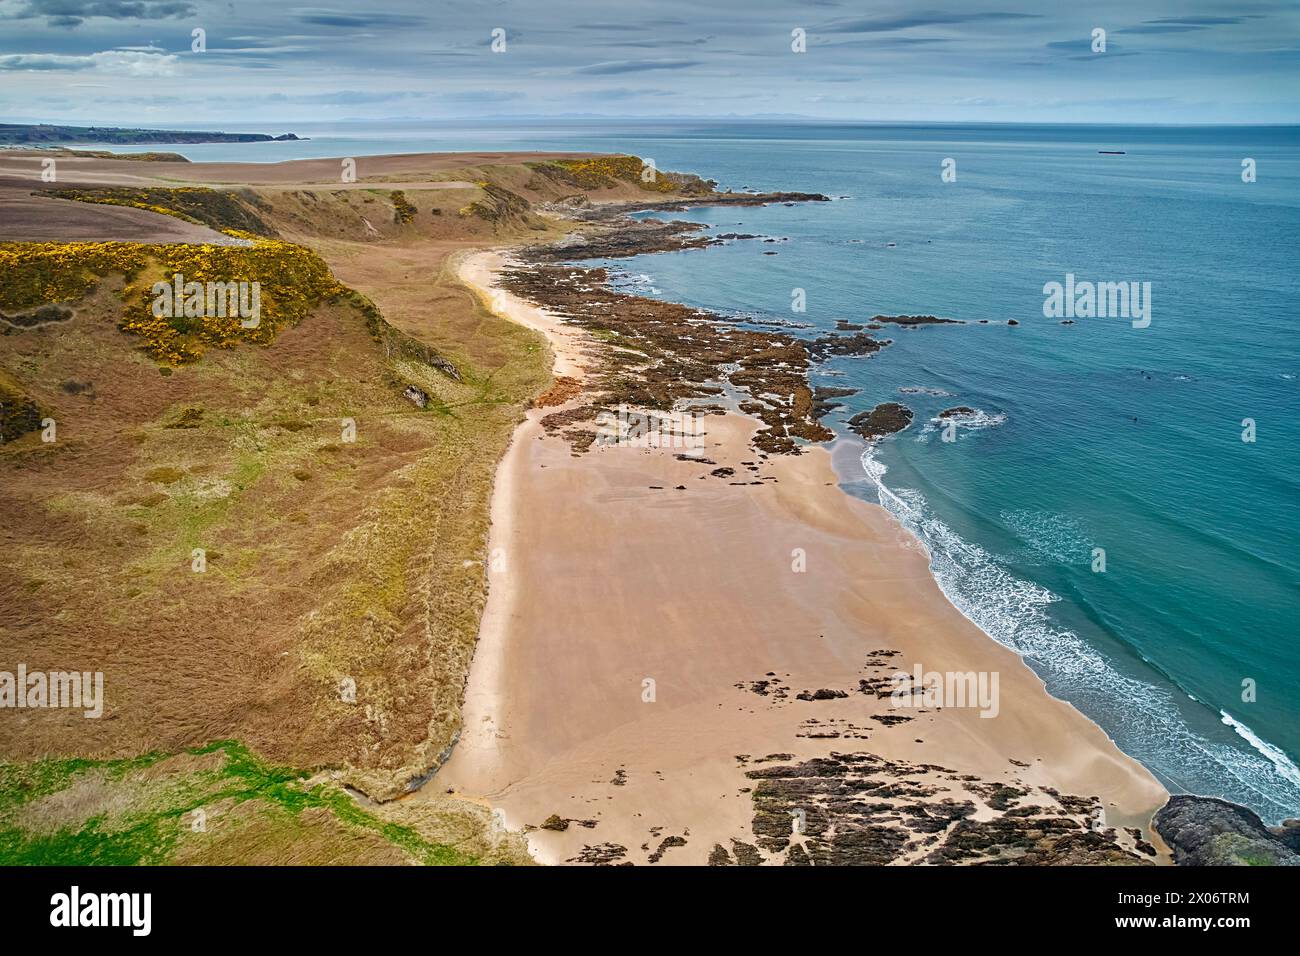 Sunnyside Beach Cullen Scotland a sand beach with rocks and the Moray Firth with a calm sea in the evening Stock Photo